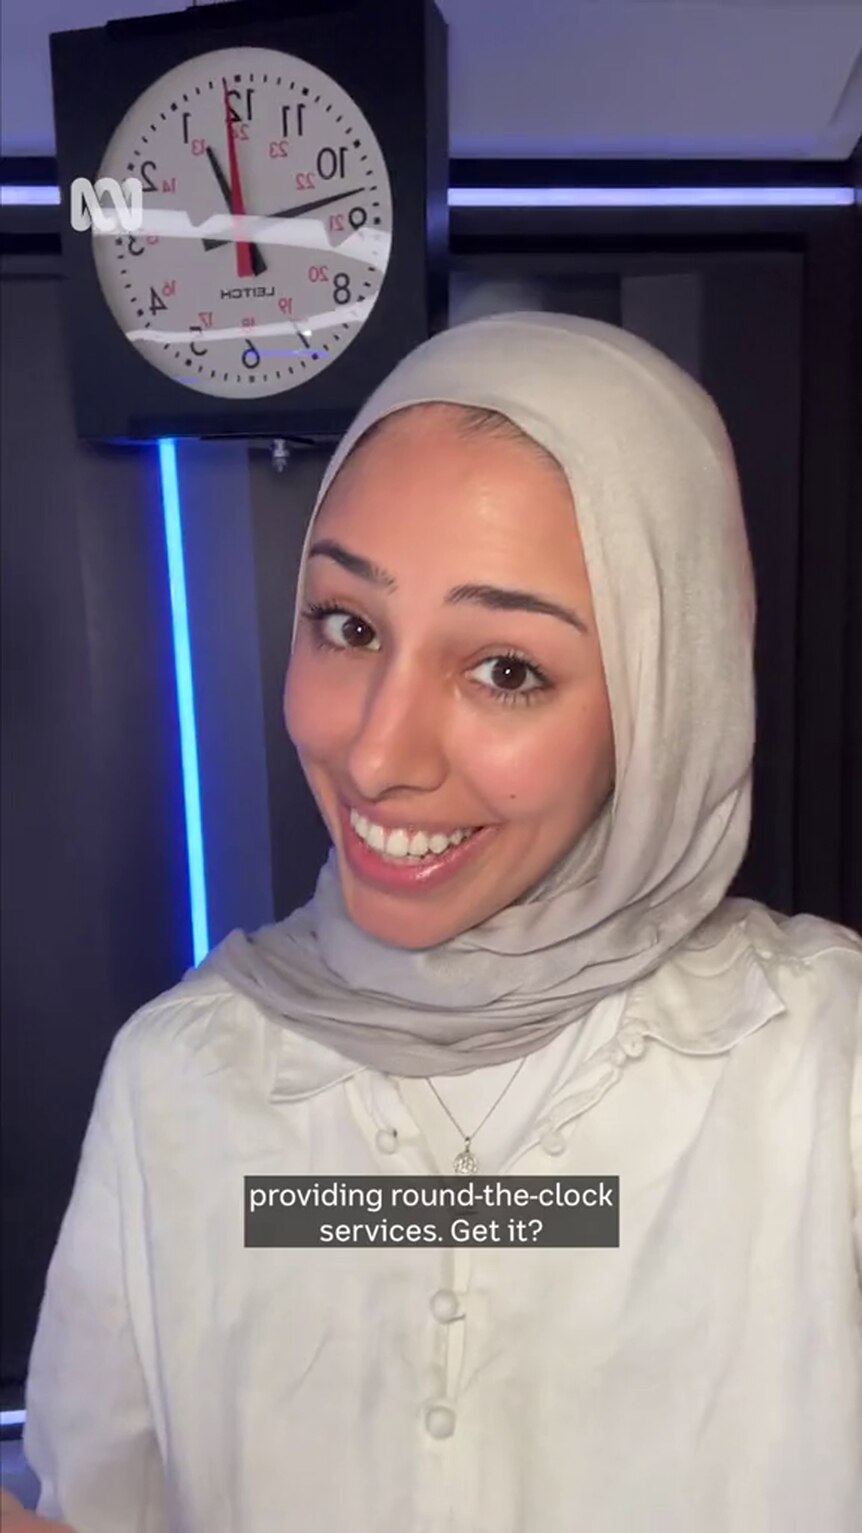 A young woman in a hijab with medium-tone skin grins, standing in front of a clock 